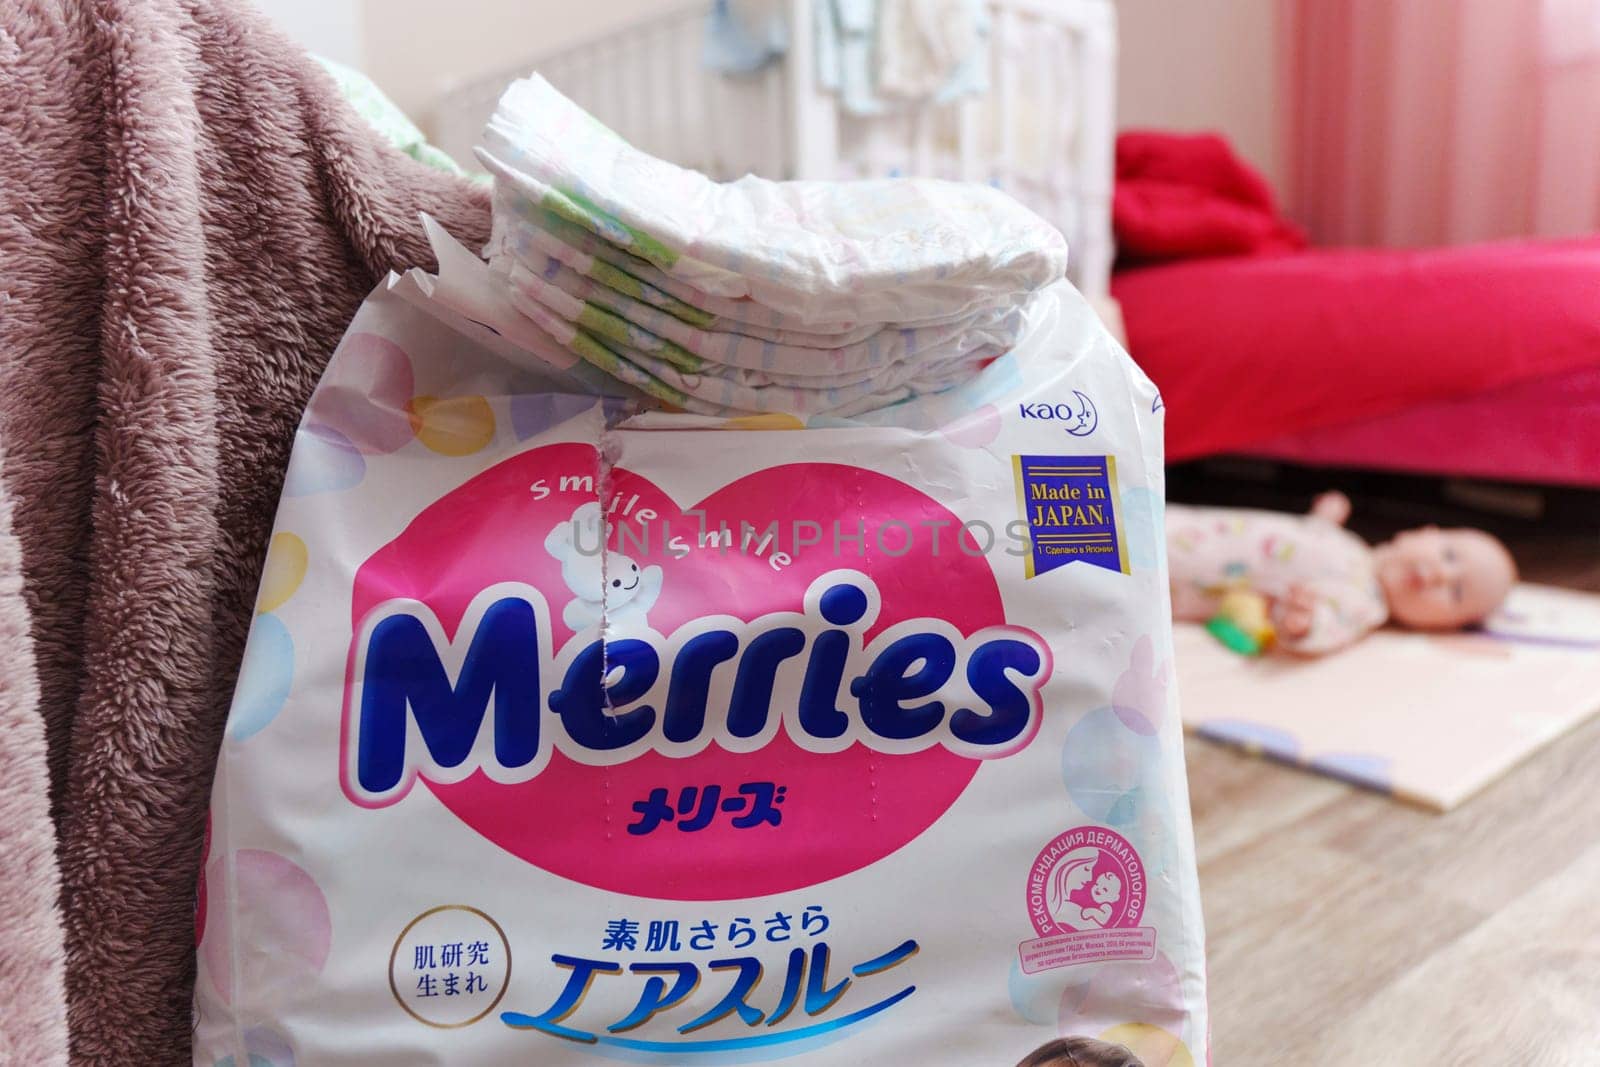 Tyumen, Russia-March 02, 2024: Merries diapers is casually placed on top of a wooden floor, showcasing the brands logo prominently.